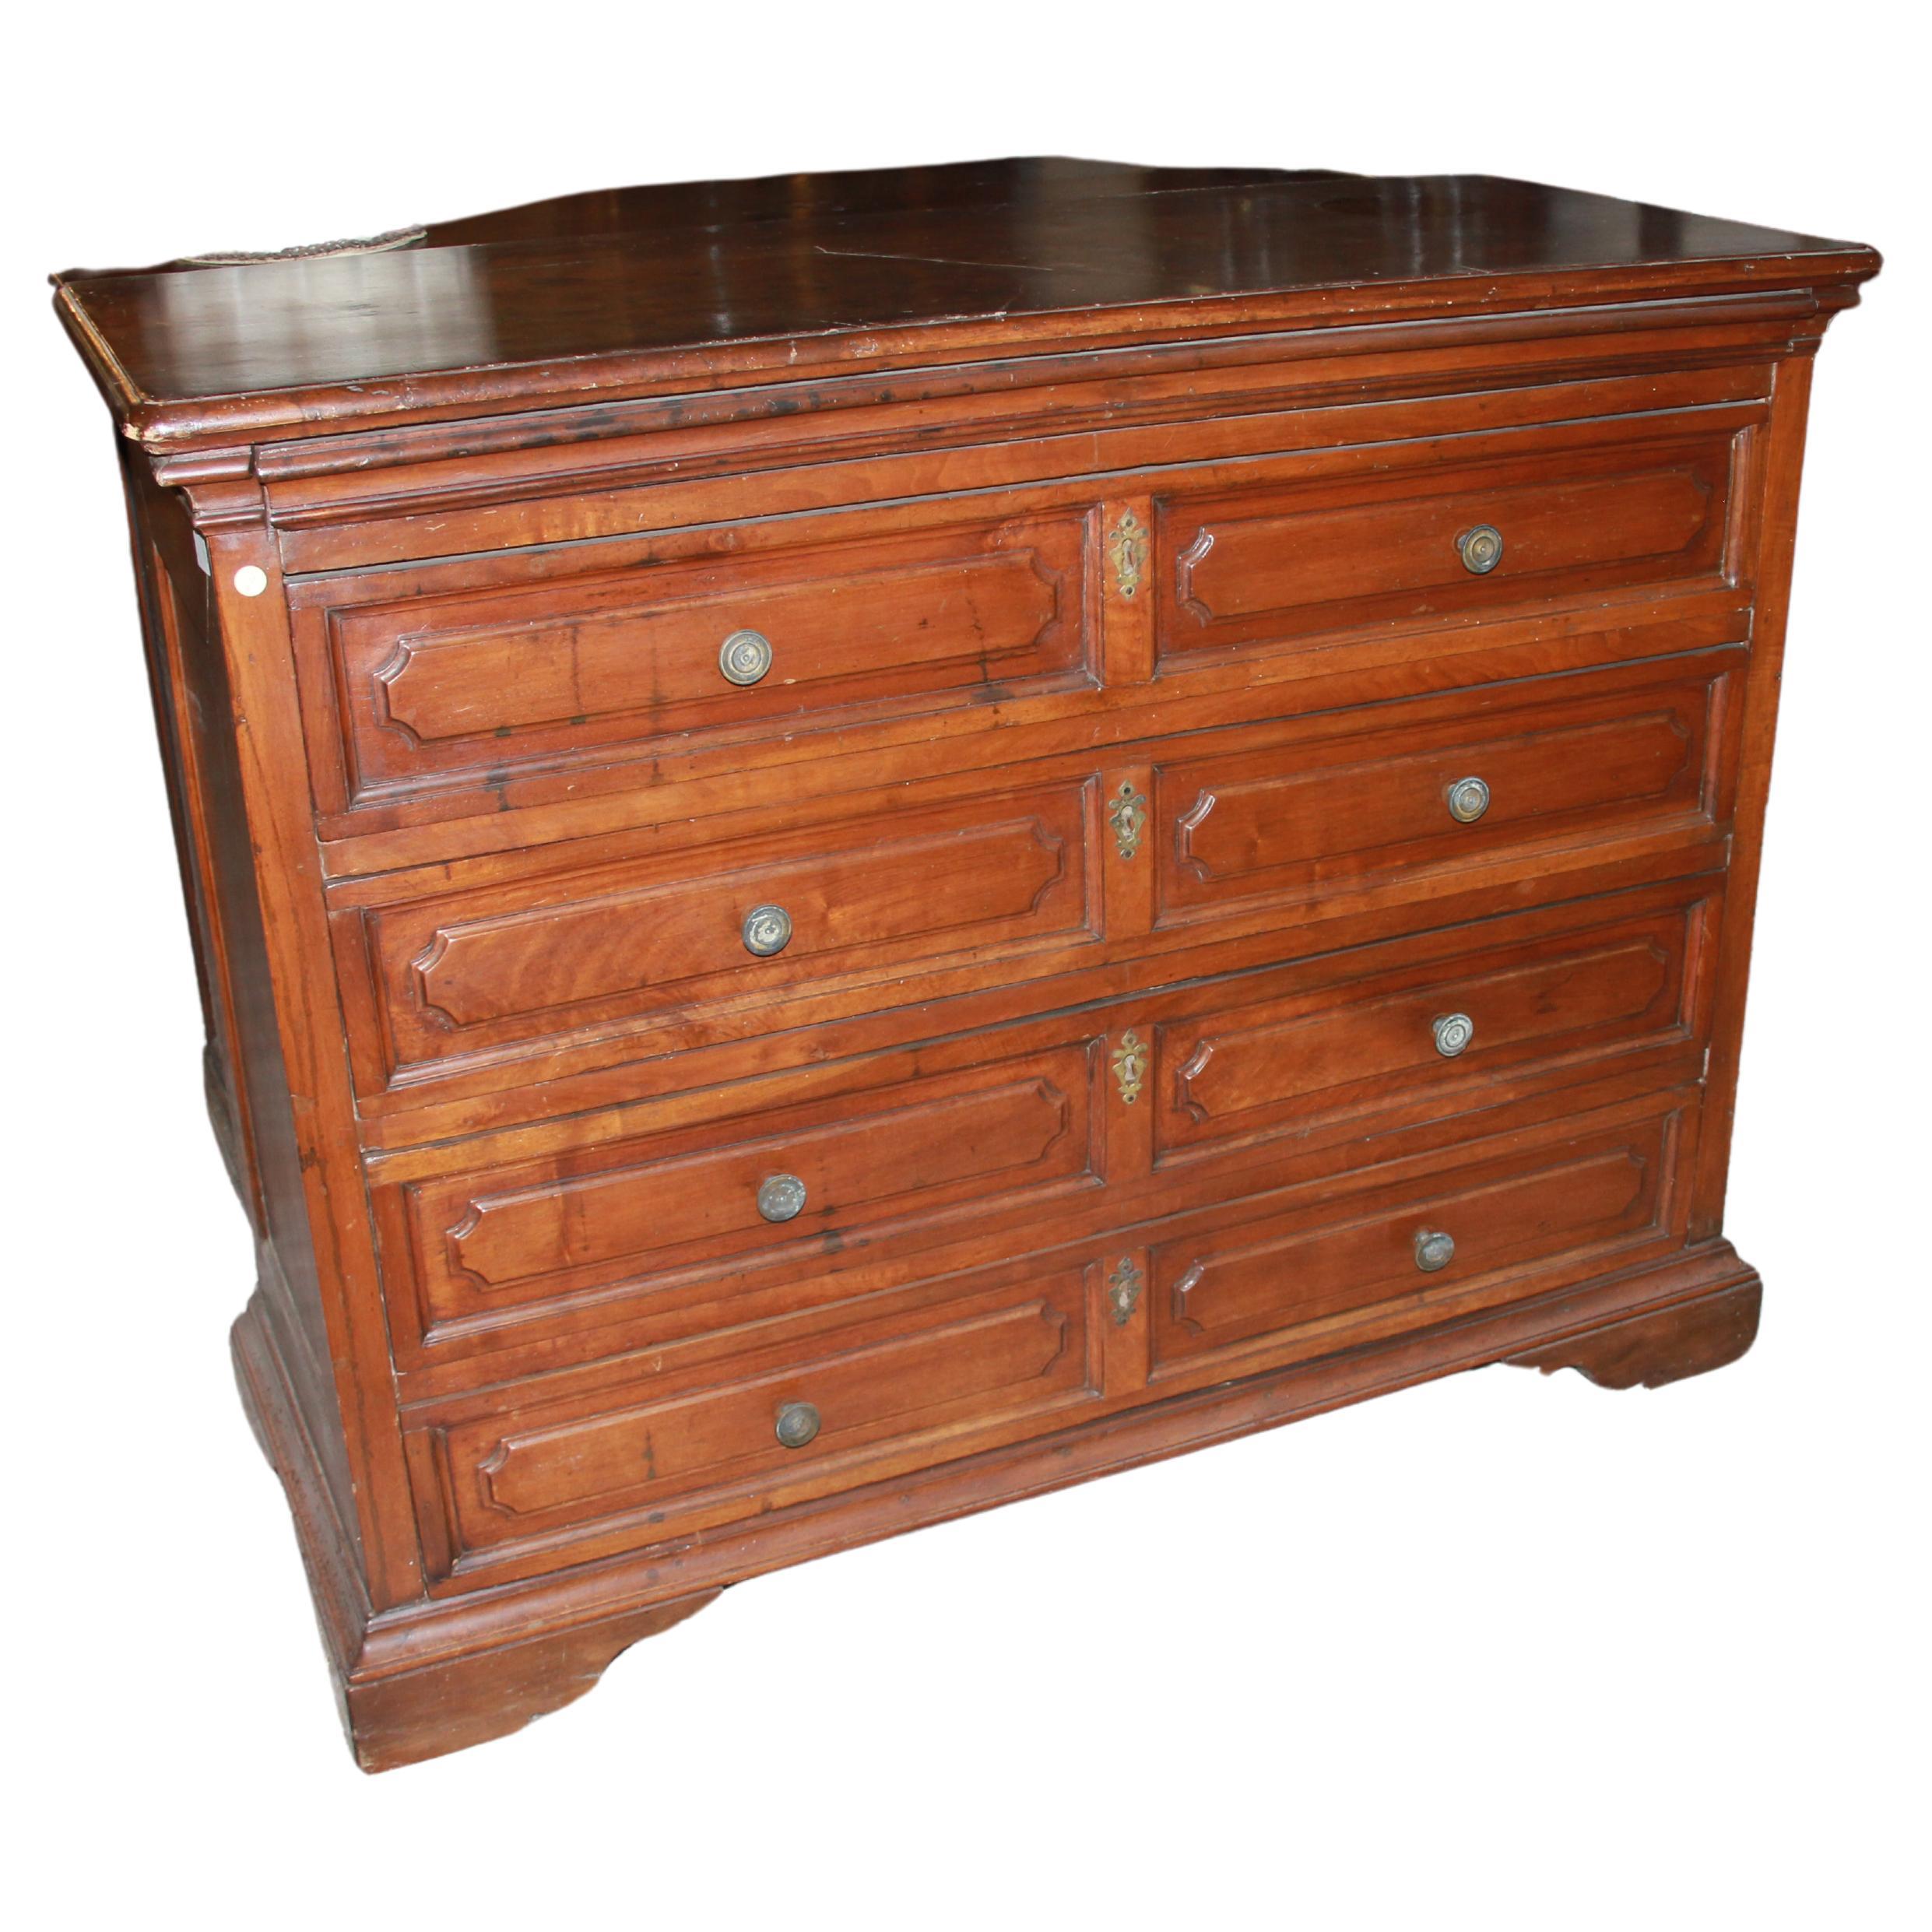  Italian chest of drawers from the 1600s in walnut wood